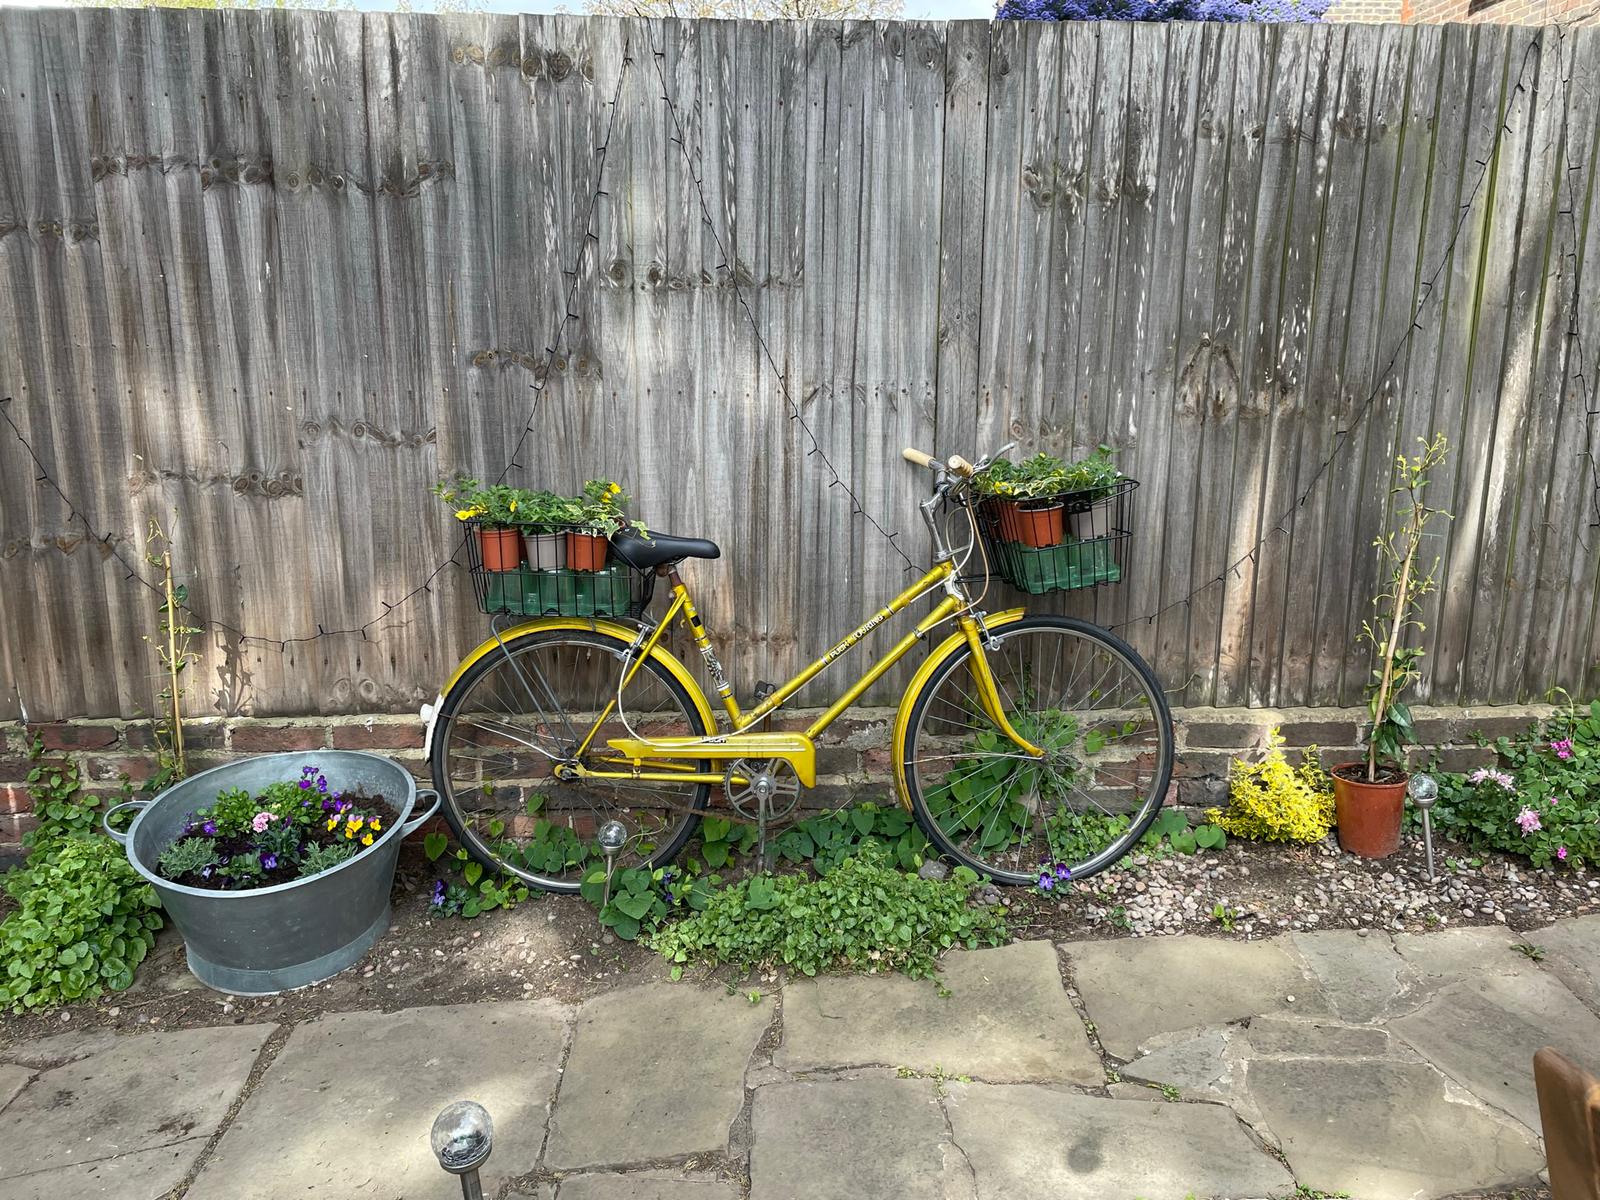 A picture of a bike in a garden with several plant pots in its front and back baskets